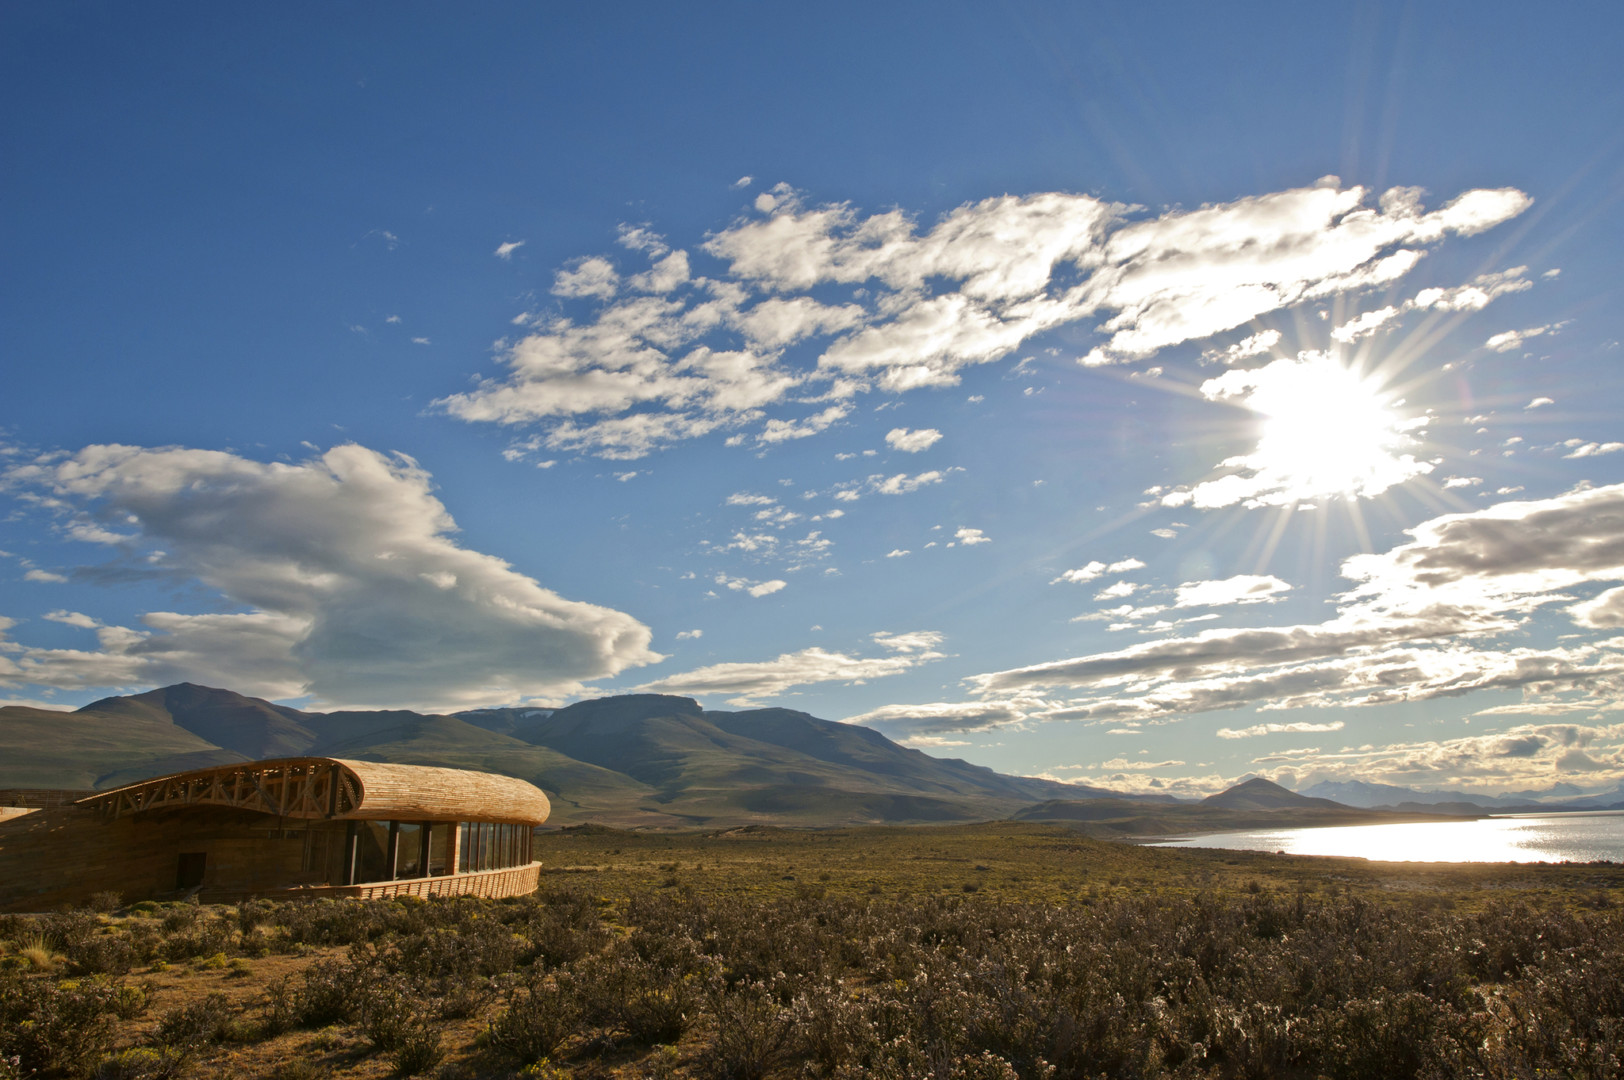 Hotel Tierra Patagonia is truly 'the max'! Superlatives fall short to describe this experience!